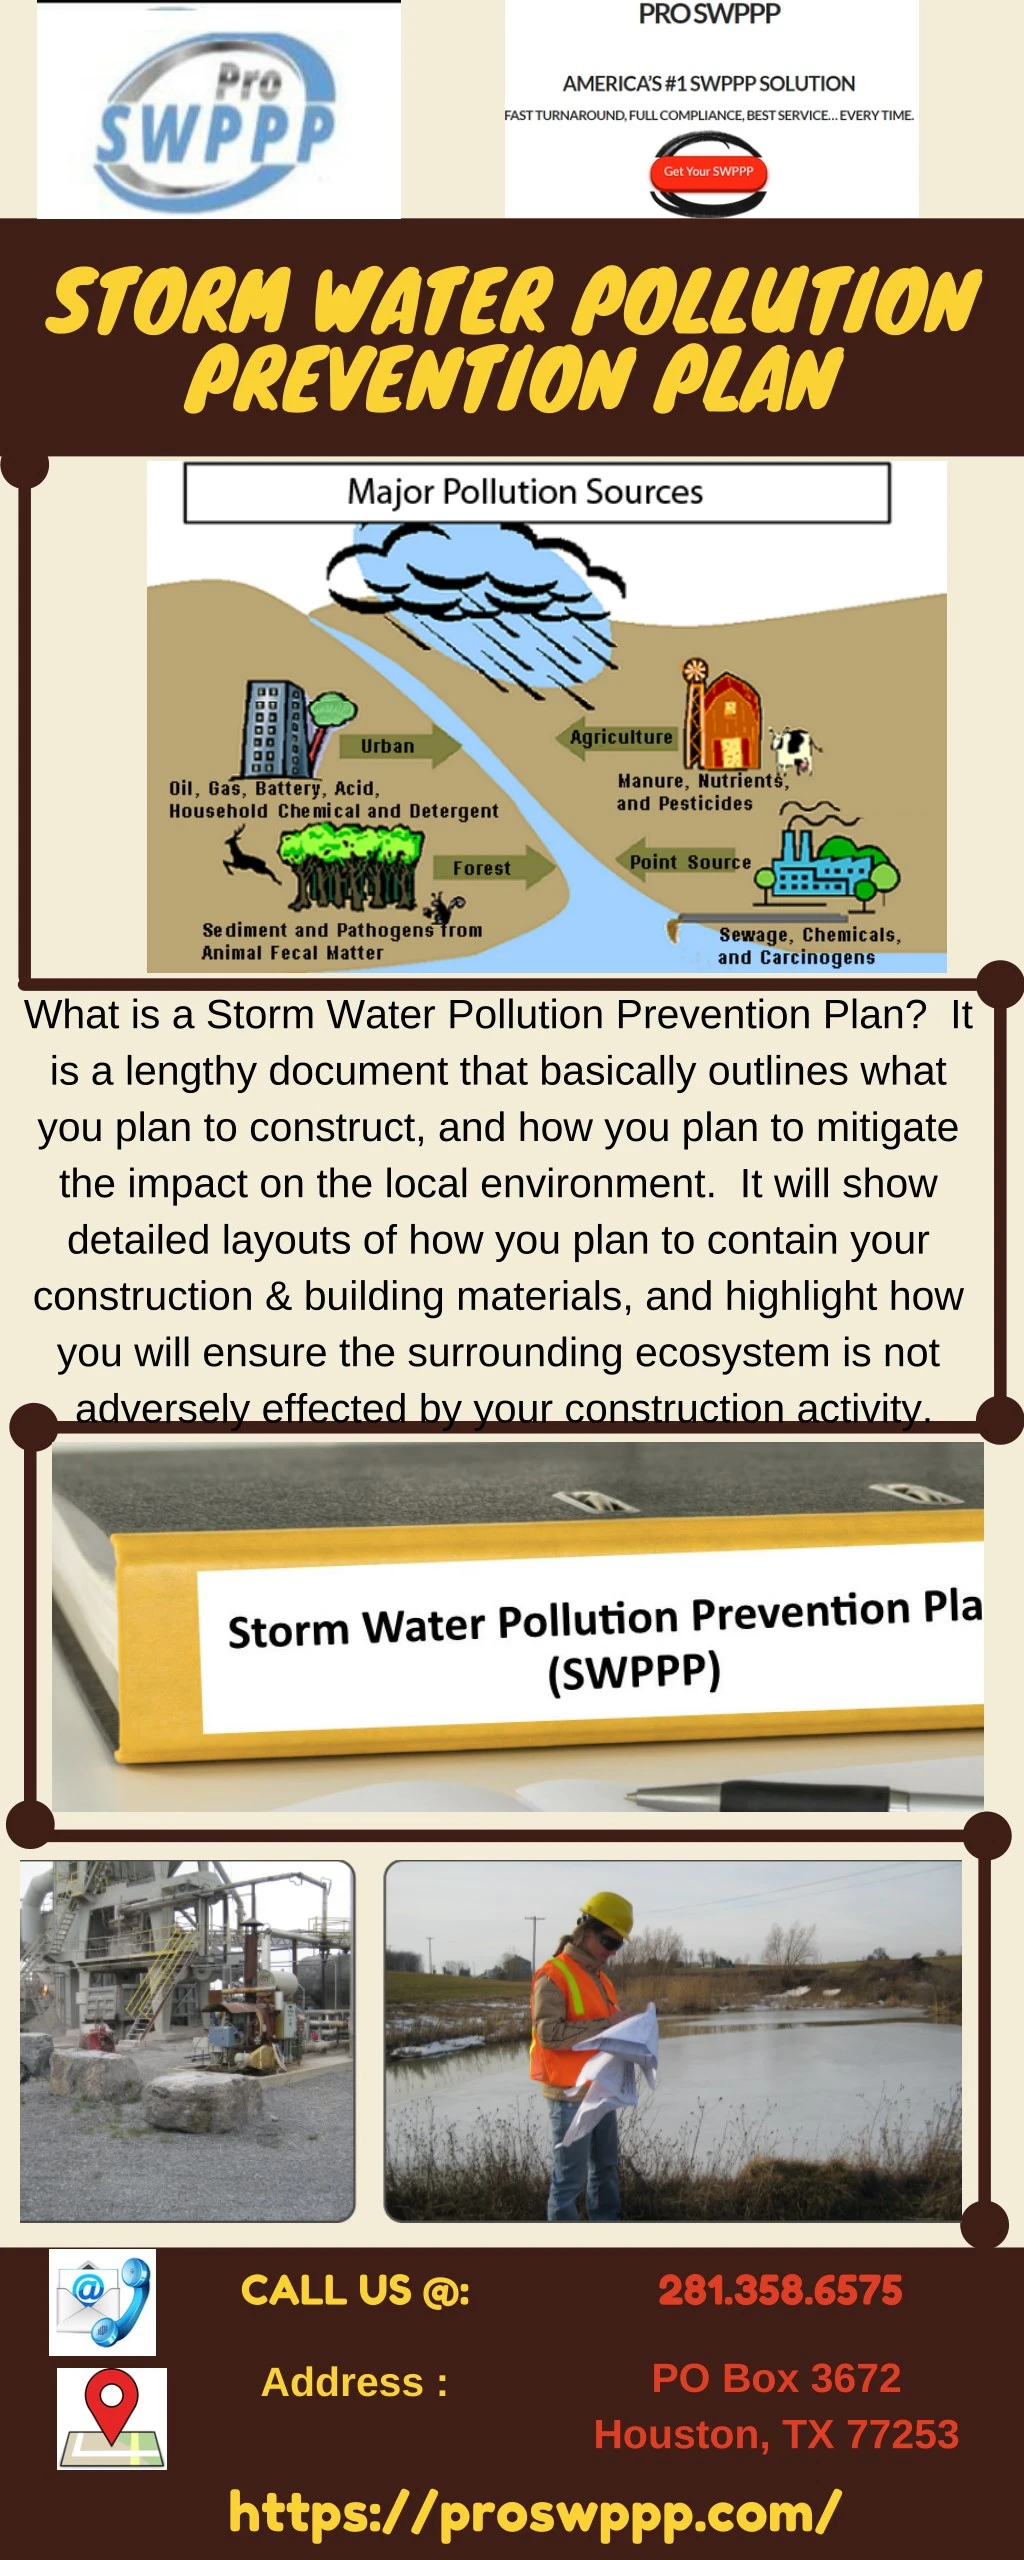 storm water pollution prevention plan